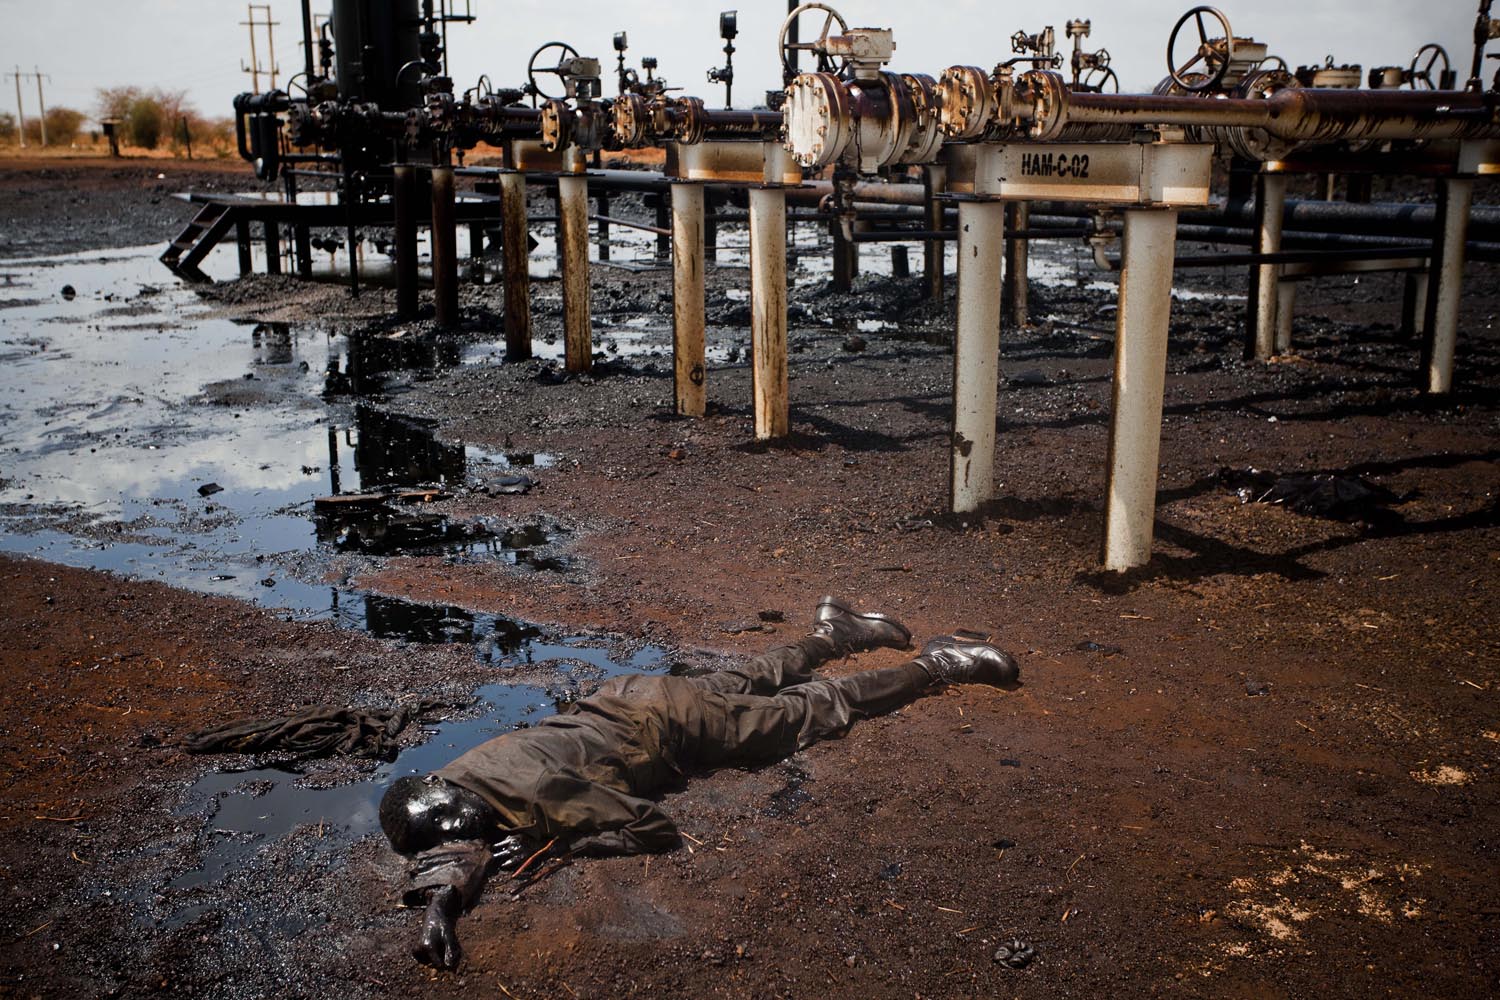 A soldier of the northern regime's army, the Sudan Armed Forces (SAF), lies dead, immersed in oil next to a leaking petroleum facility after heavy fighting with southern SPLA troops after they entered Heglig in mid April.